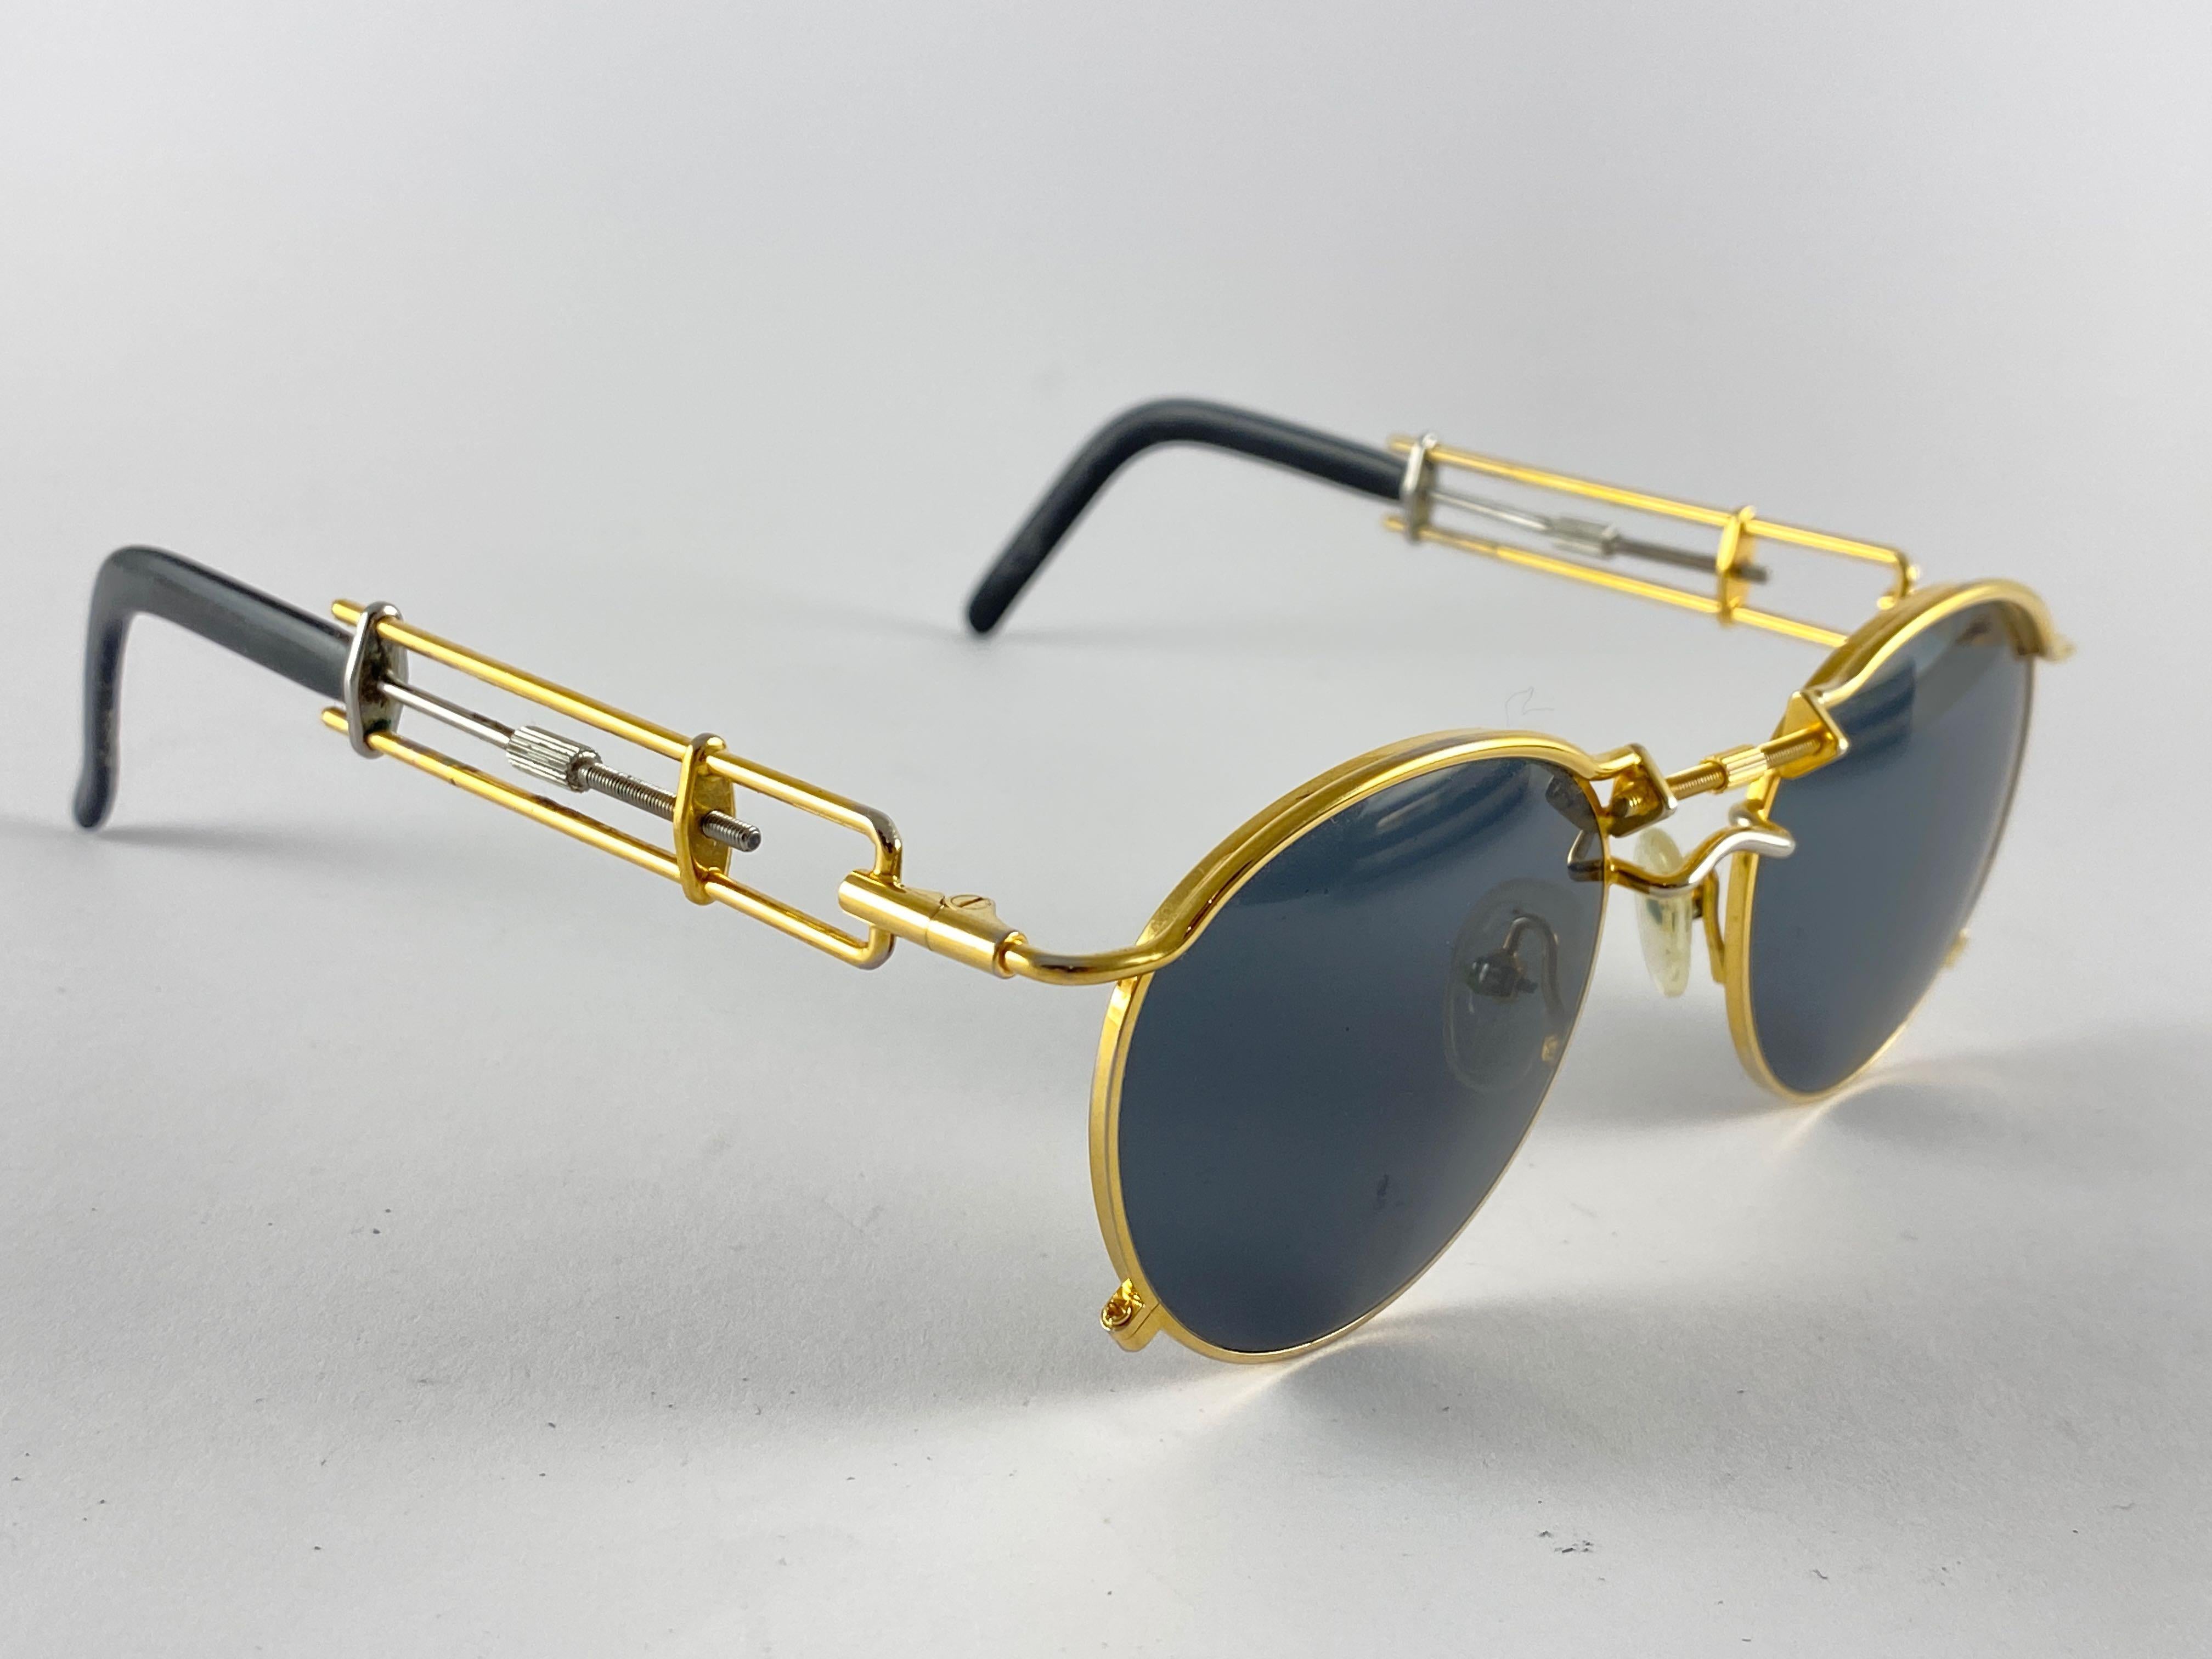 New Vintage Jean Paul Gaultier 56 0174 Gold and Silver Details frame. 
Dark grey lenses that complete a ready to wear JPG look.

Amazing design with strong yet intricate details.
This item has visible sign of wear on the black acetate at the end of